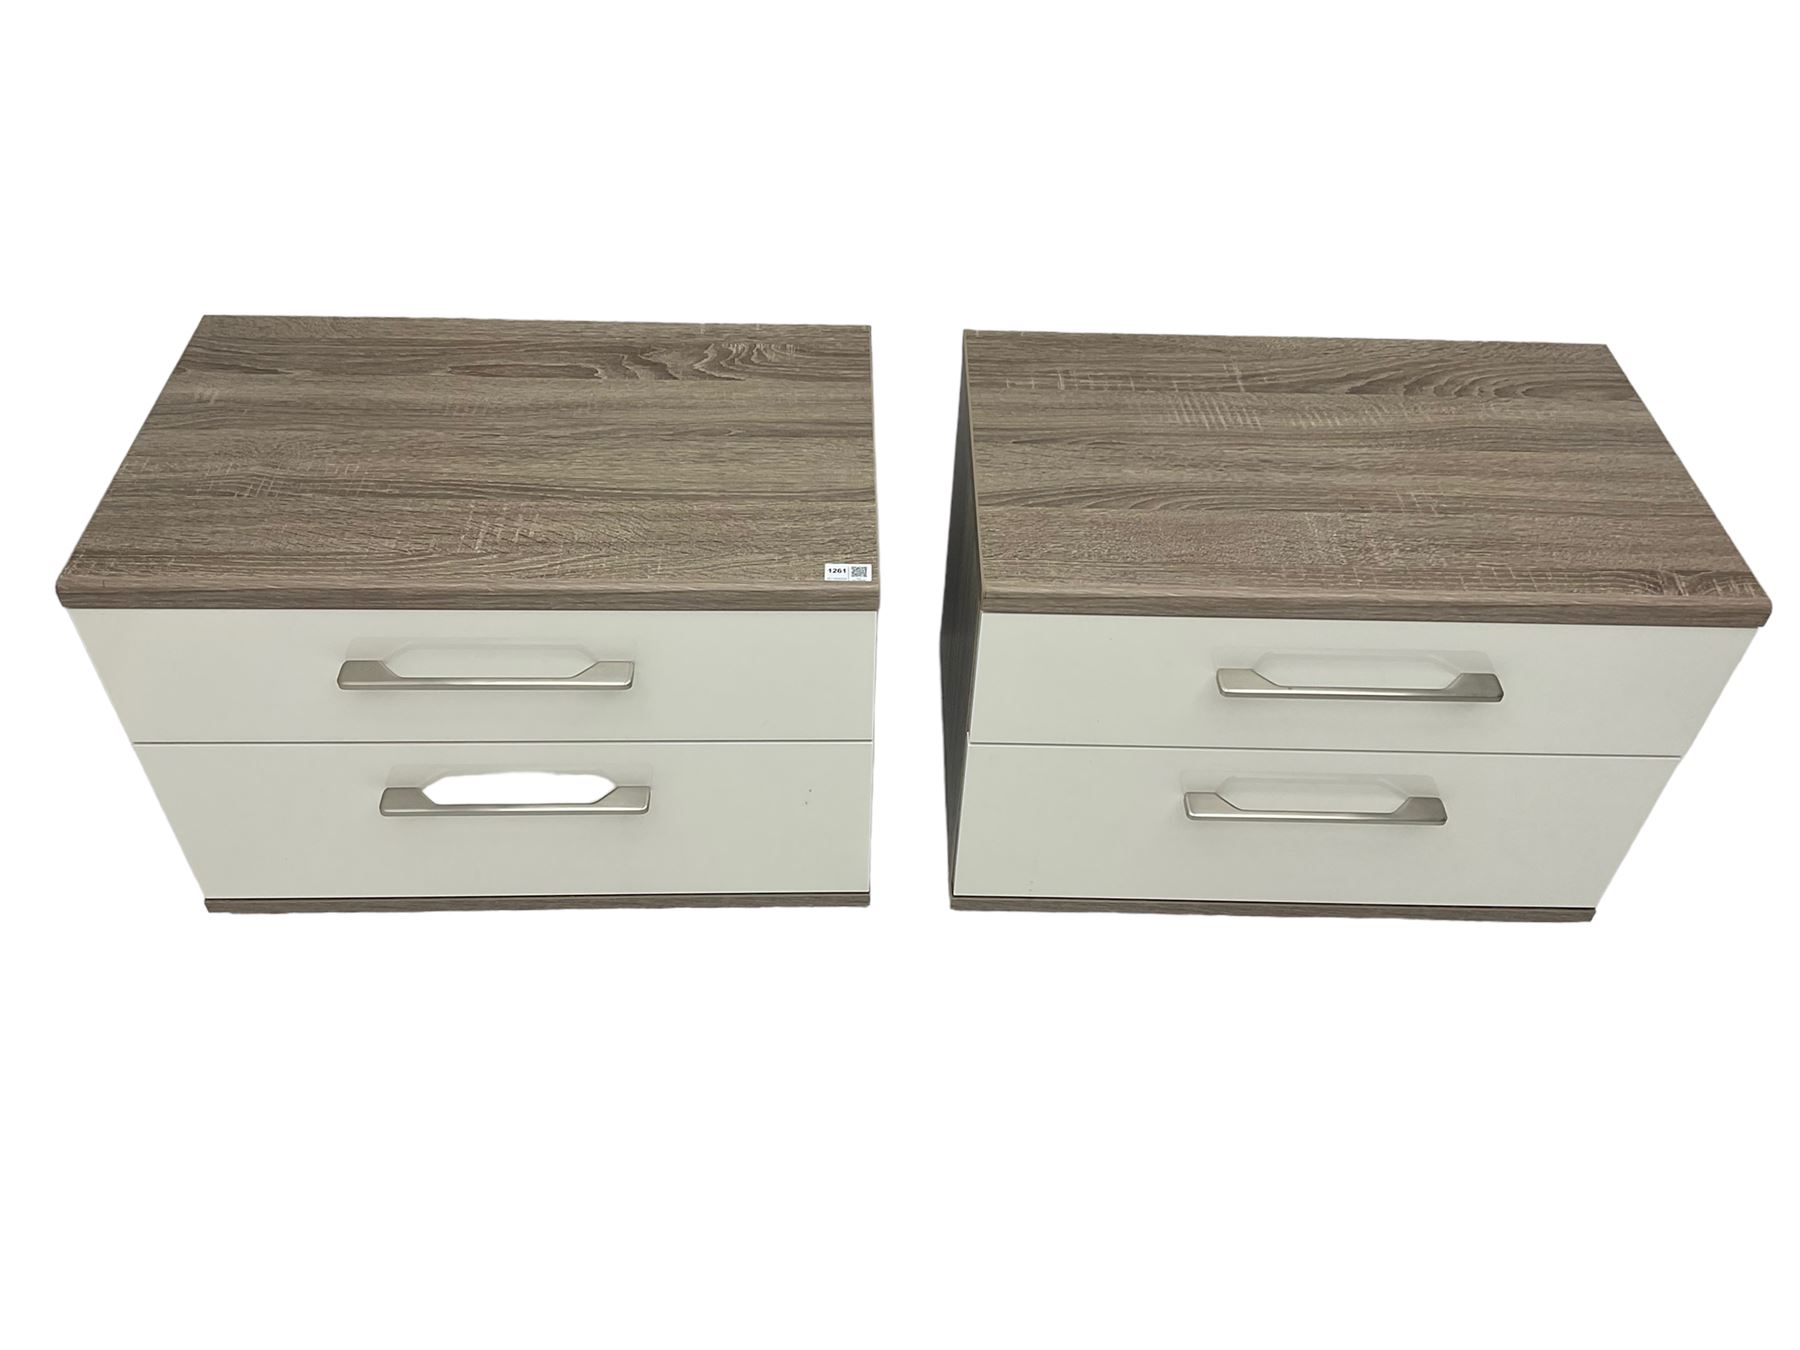 Pair of Loddenkemper 'Luna' two drawer bedside chests - Image 2 of 5